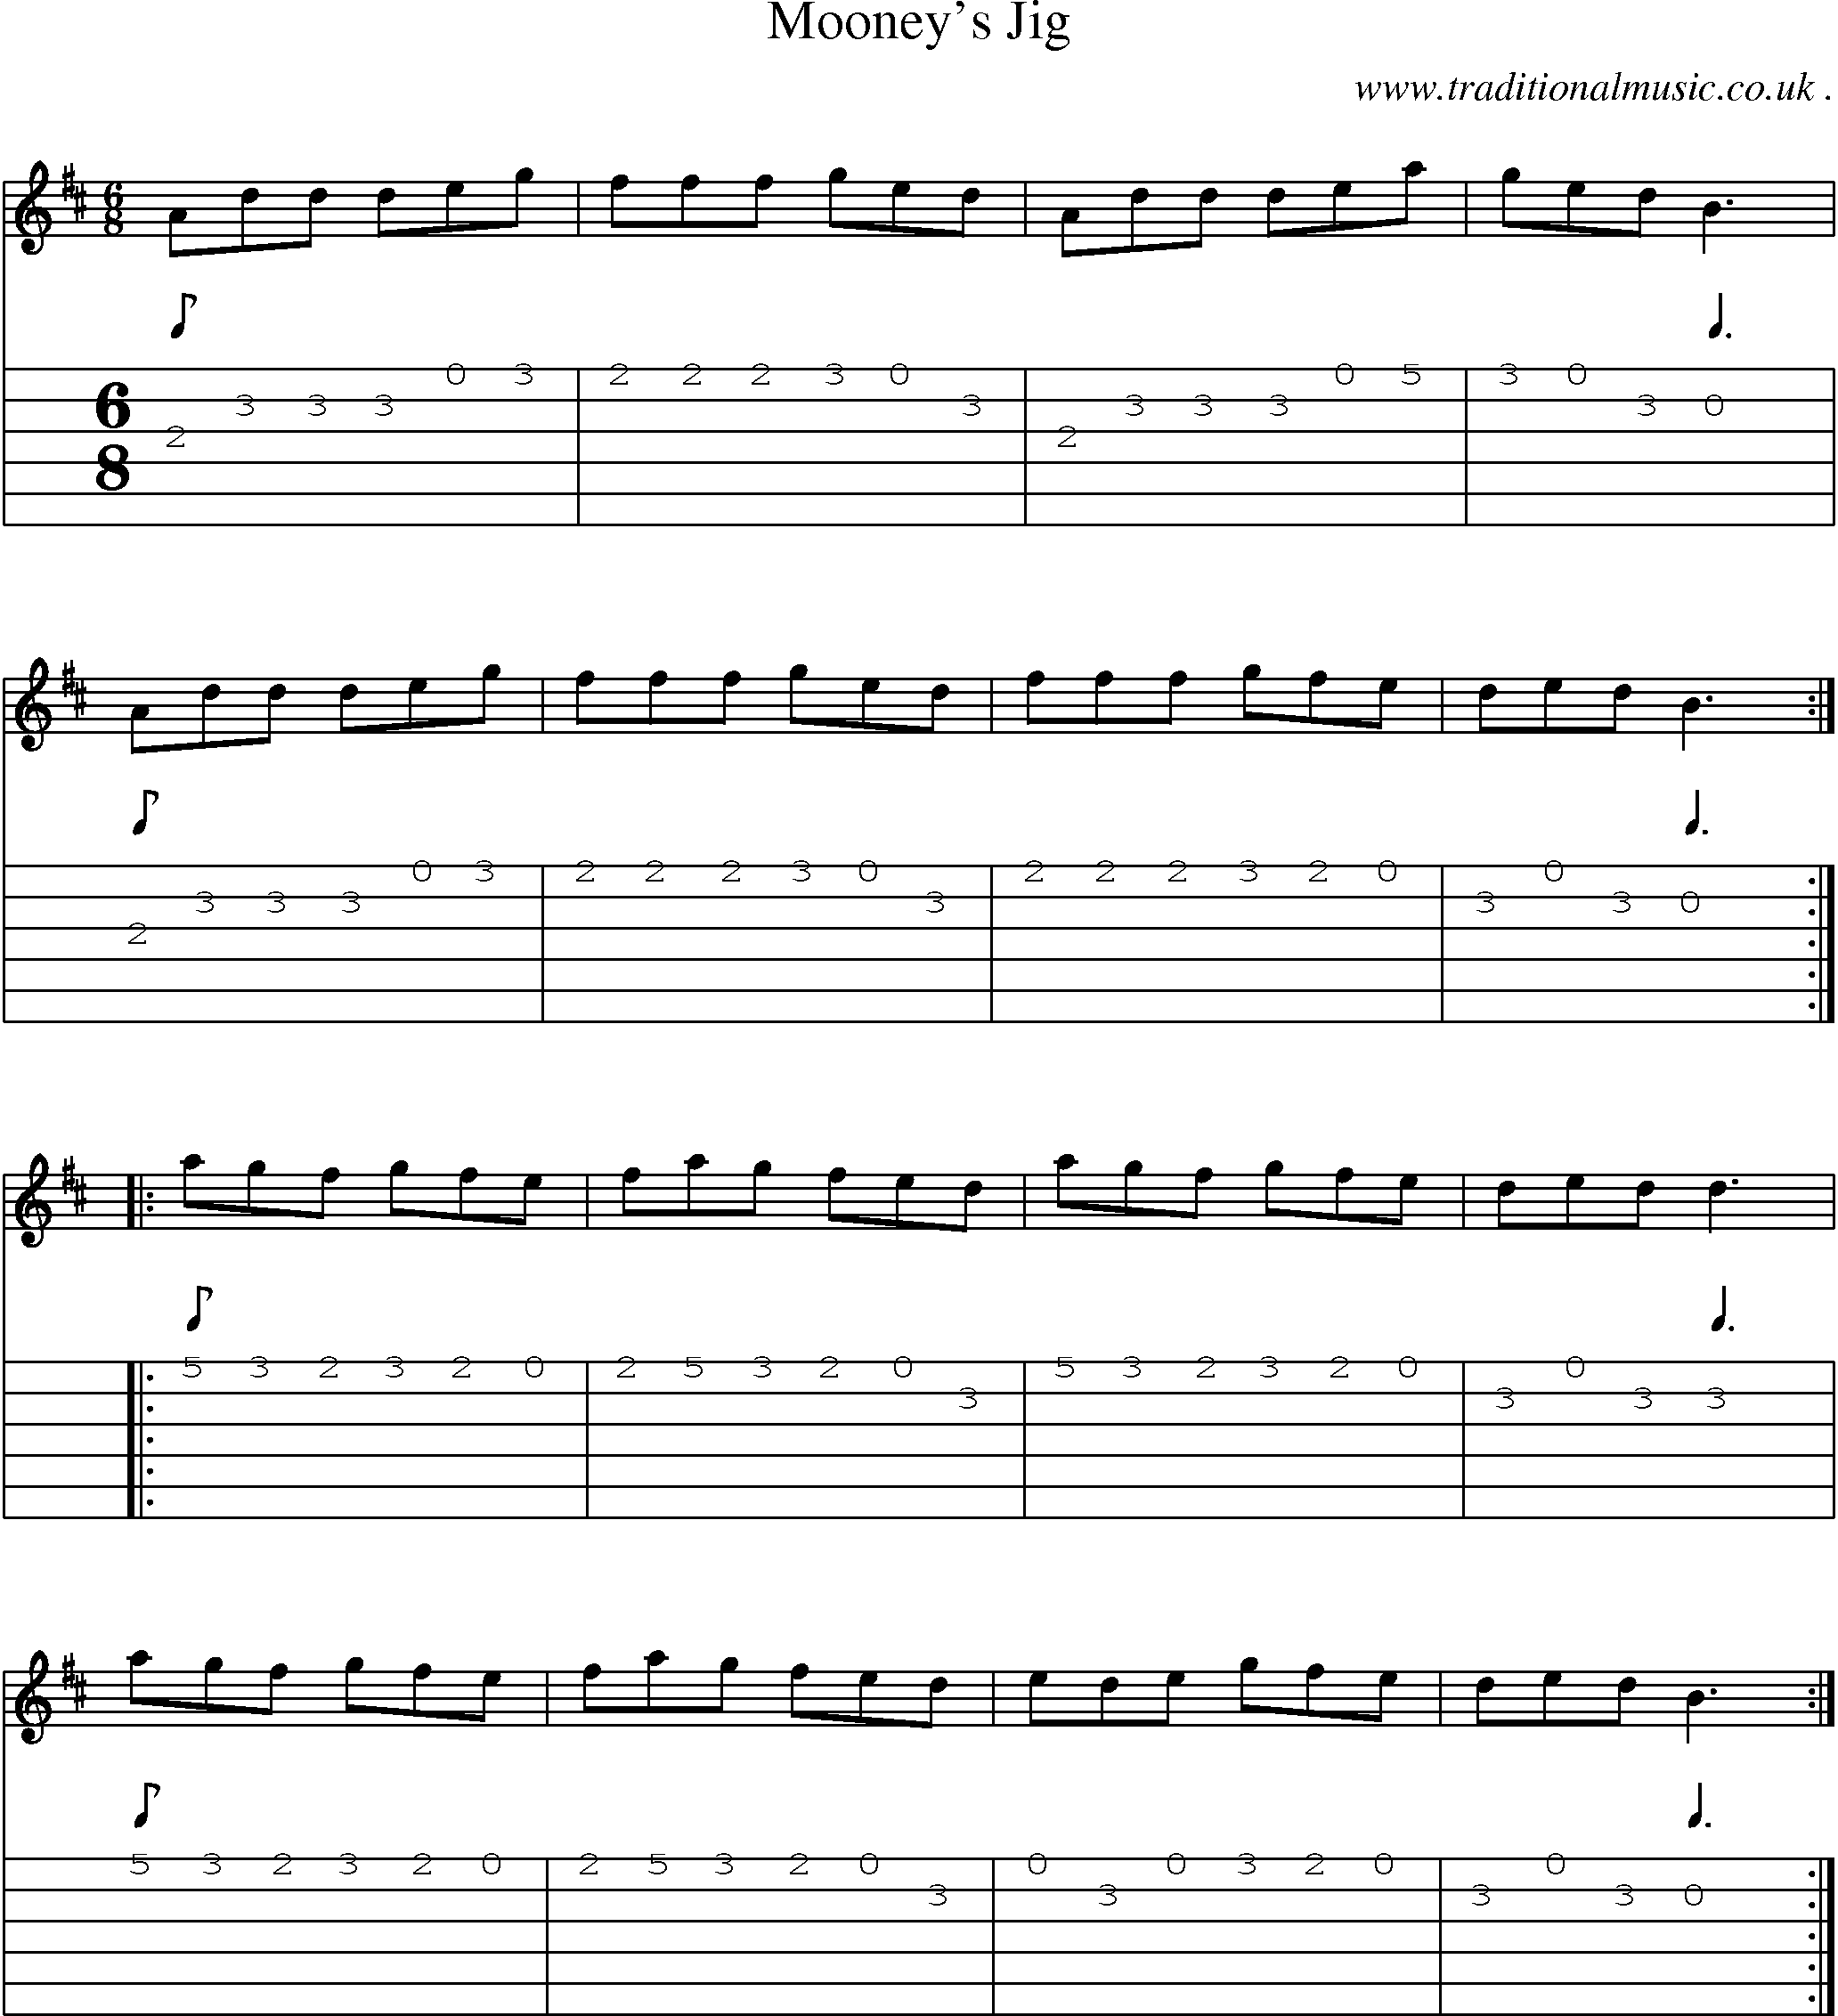 Sheet-Music and Guitar Tabs for Mooneys Jig